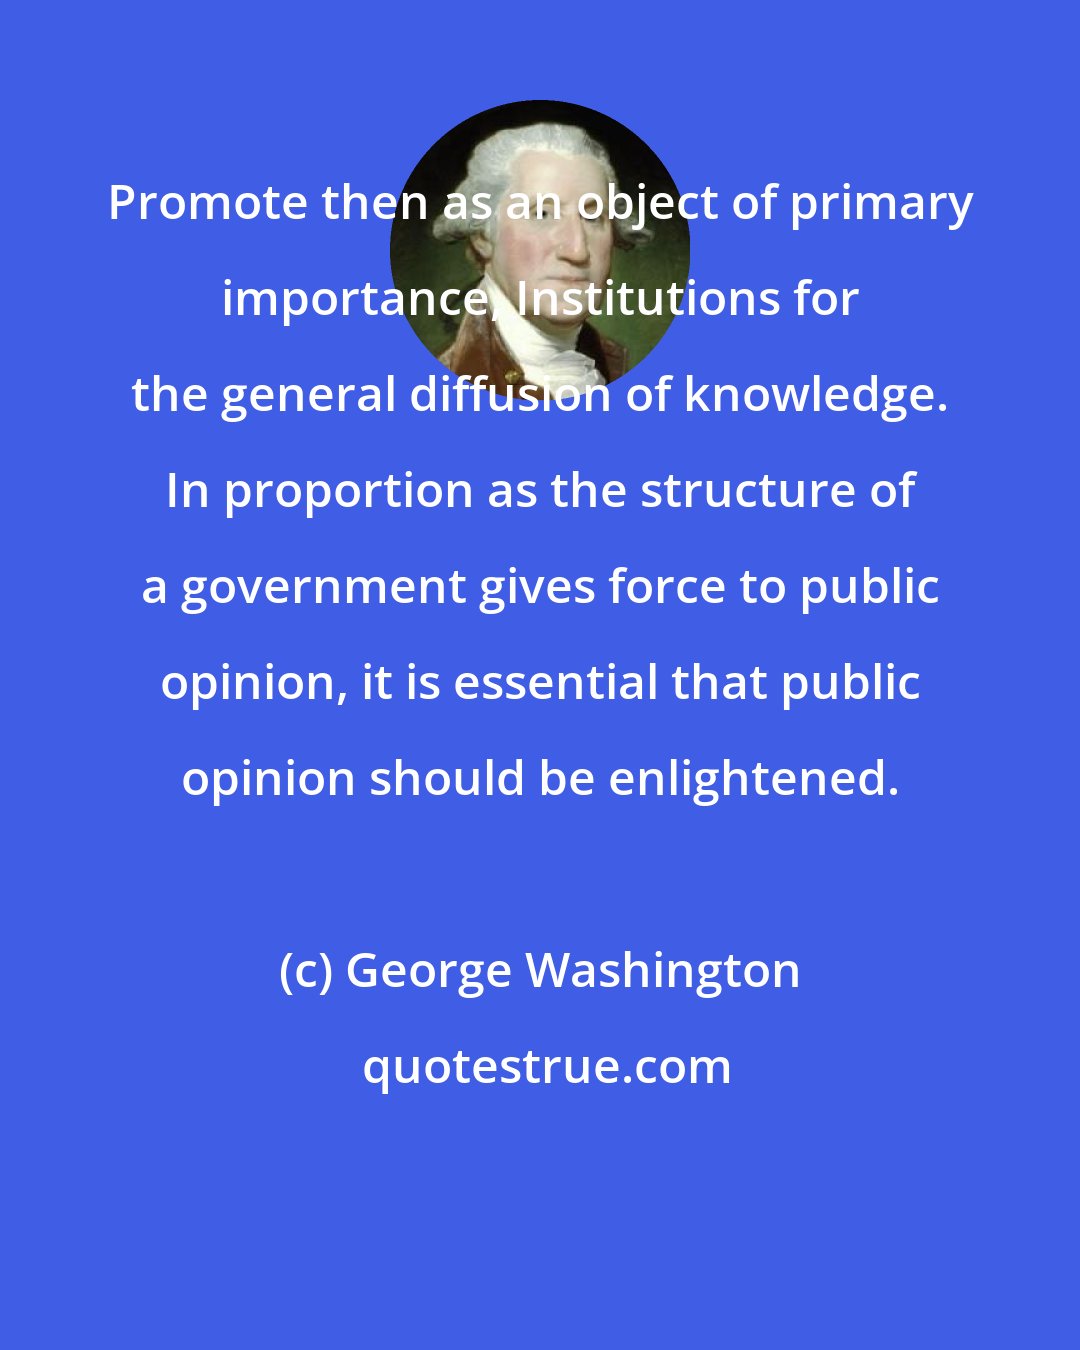 George Washington: Promote then as an object of primary importance, Institutions for the general diffusion of knowledge. In proportion as the structure of a government gives force to public opinion, it is essential that public opinion should be enlightened.